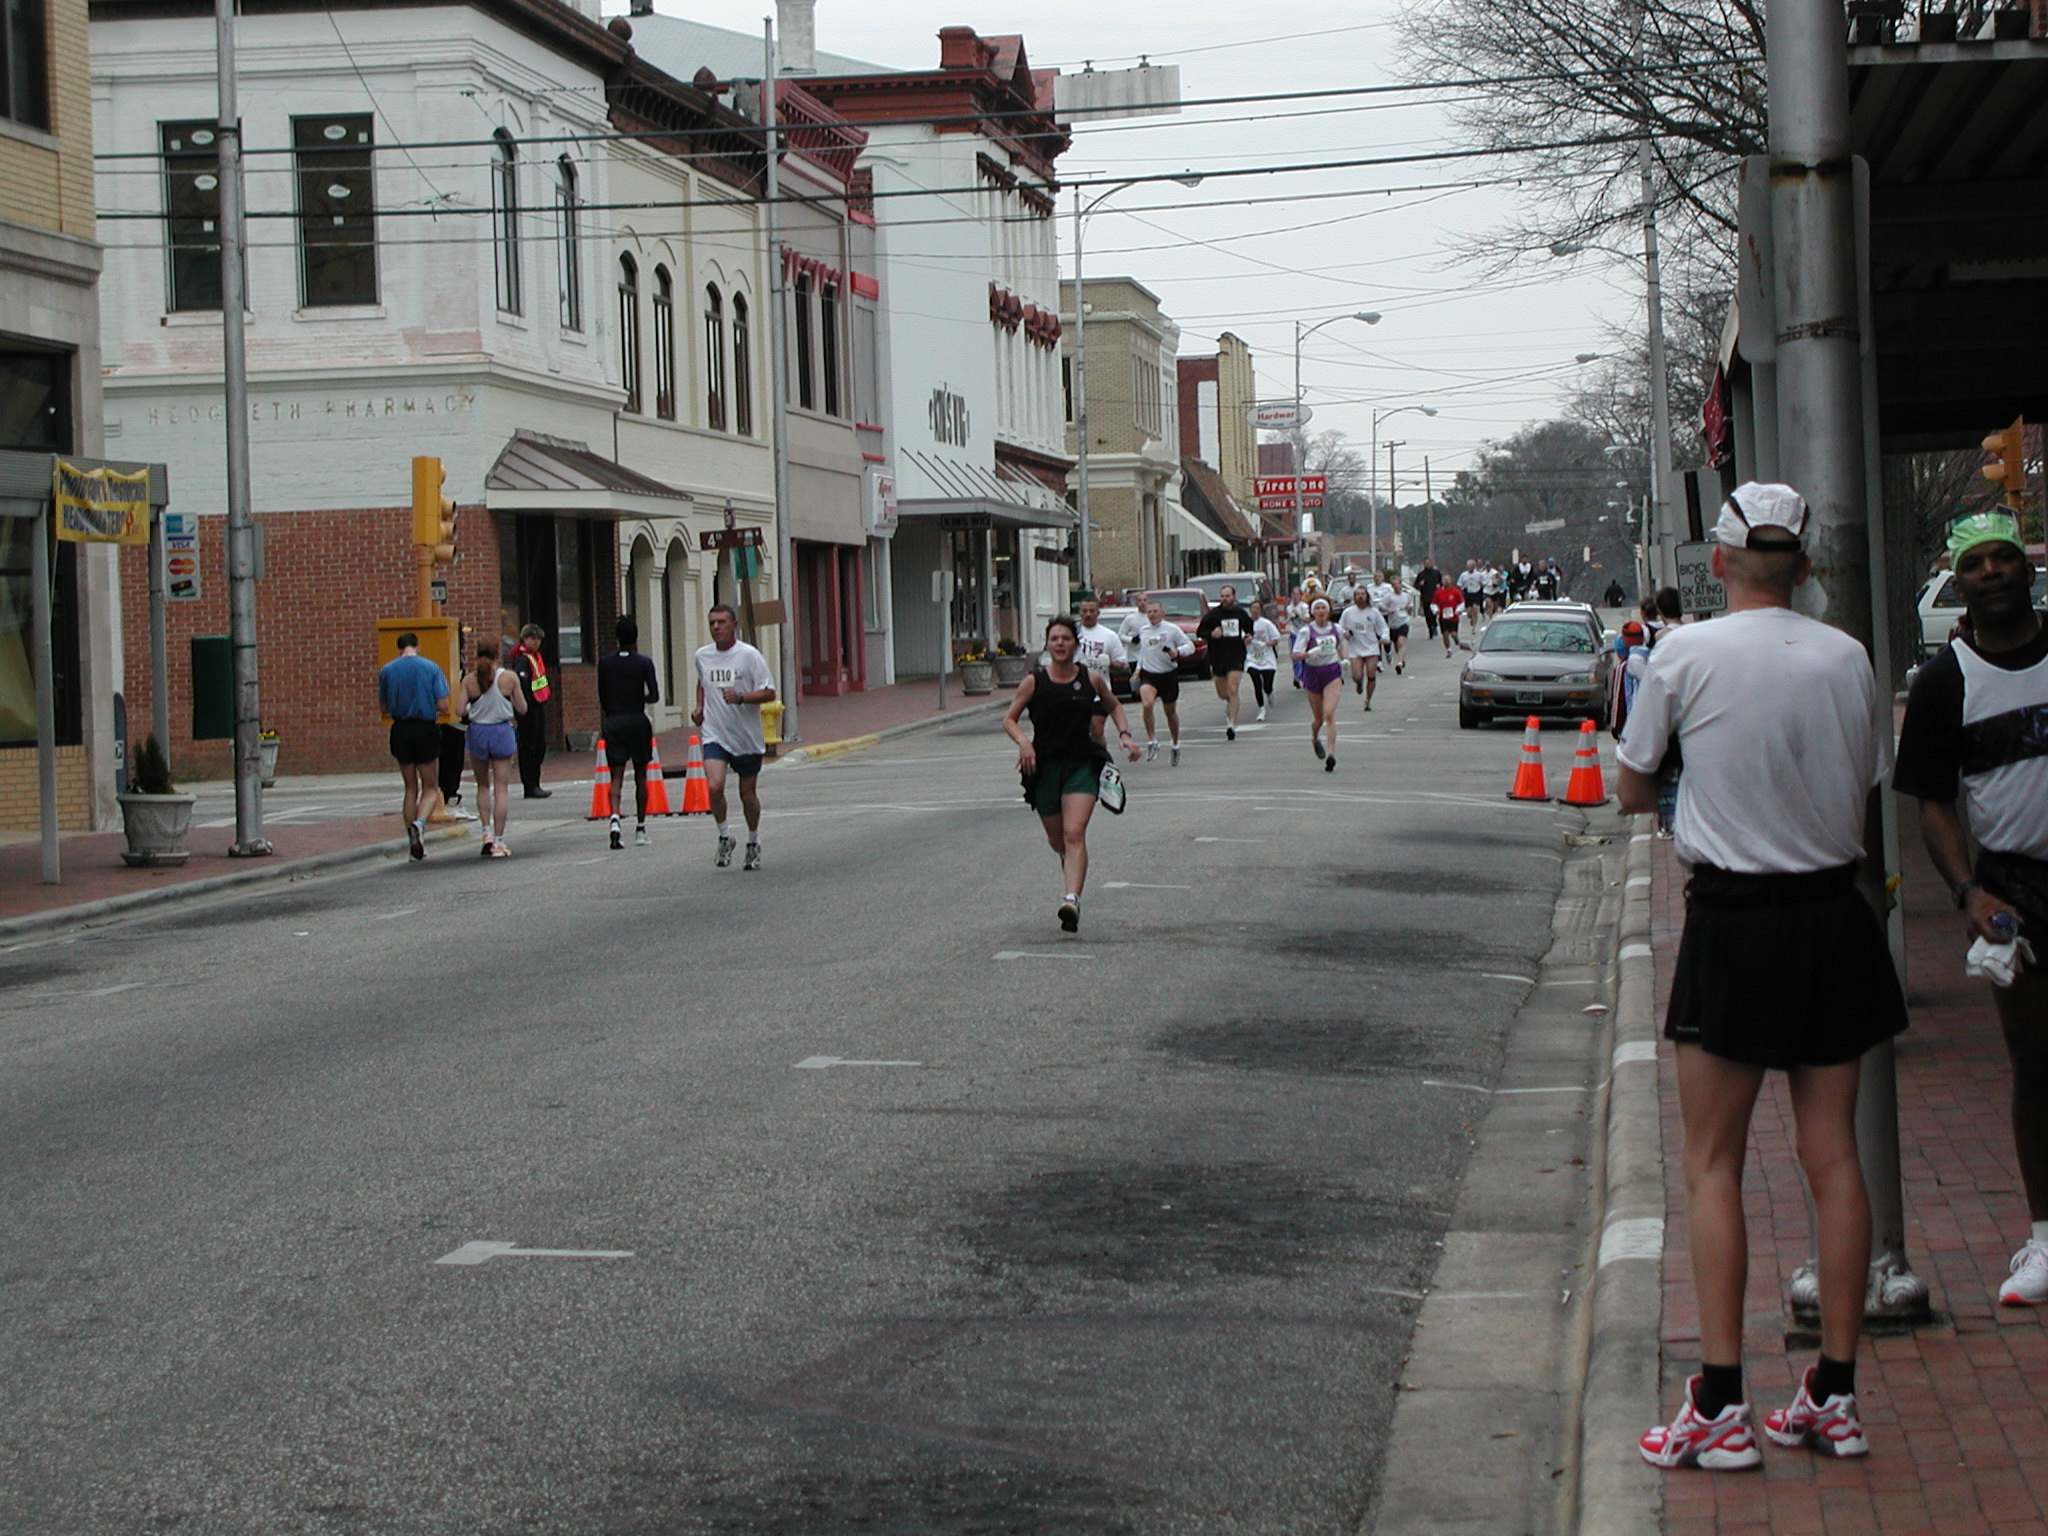 A road race in downtown Lumberton, NC.